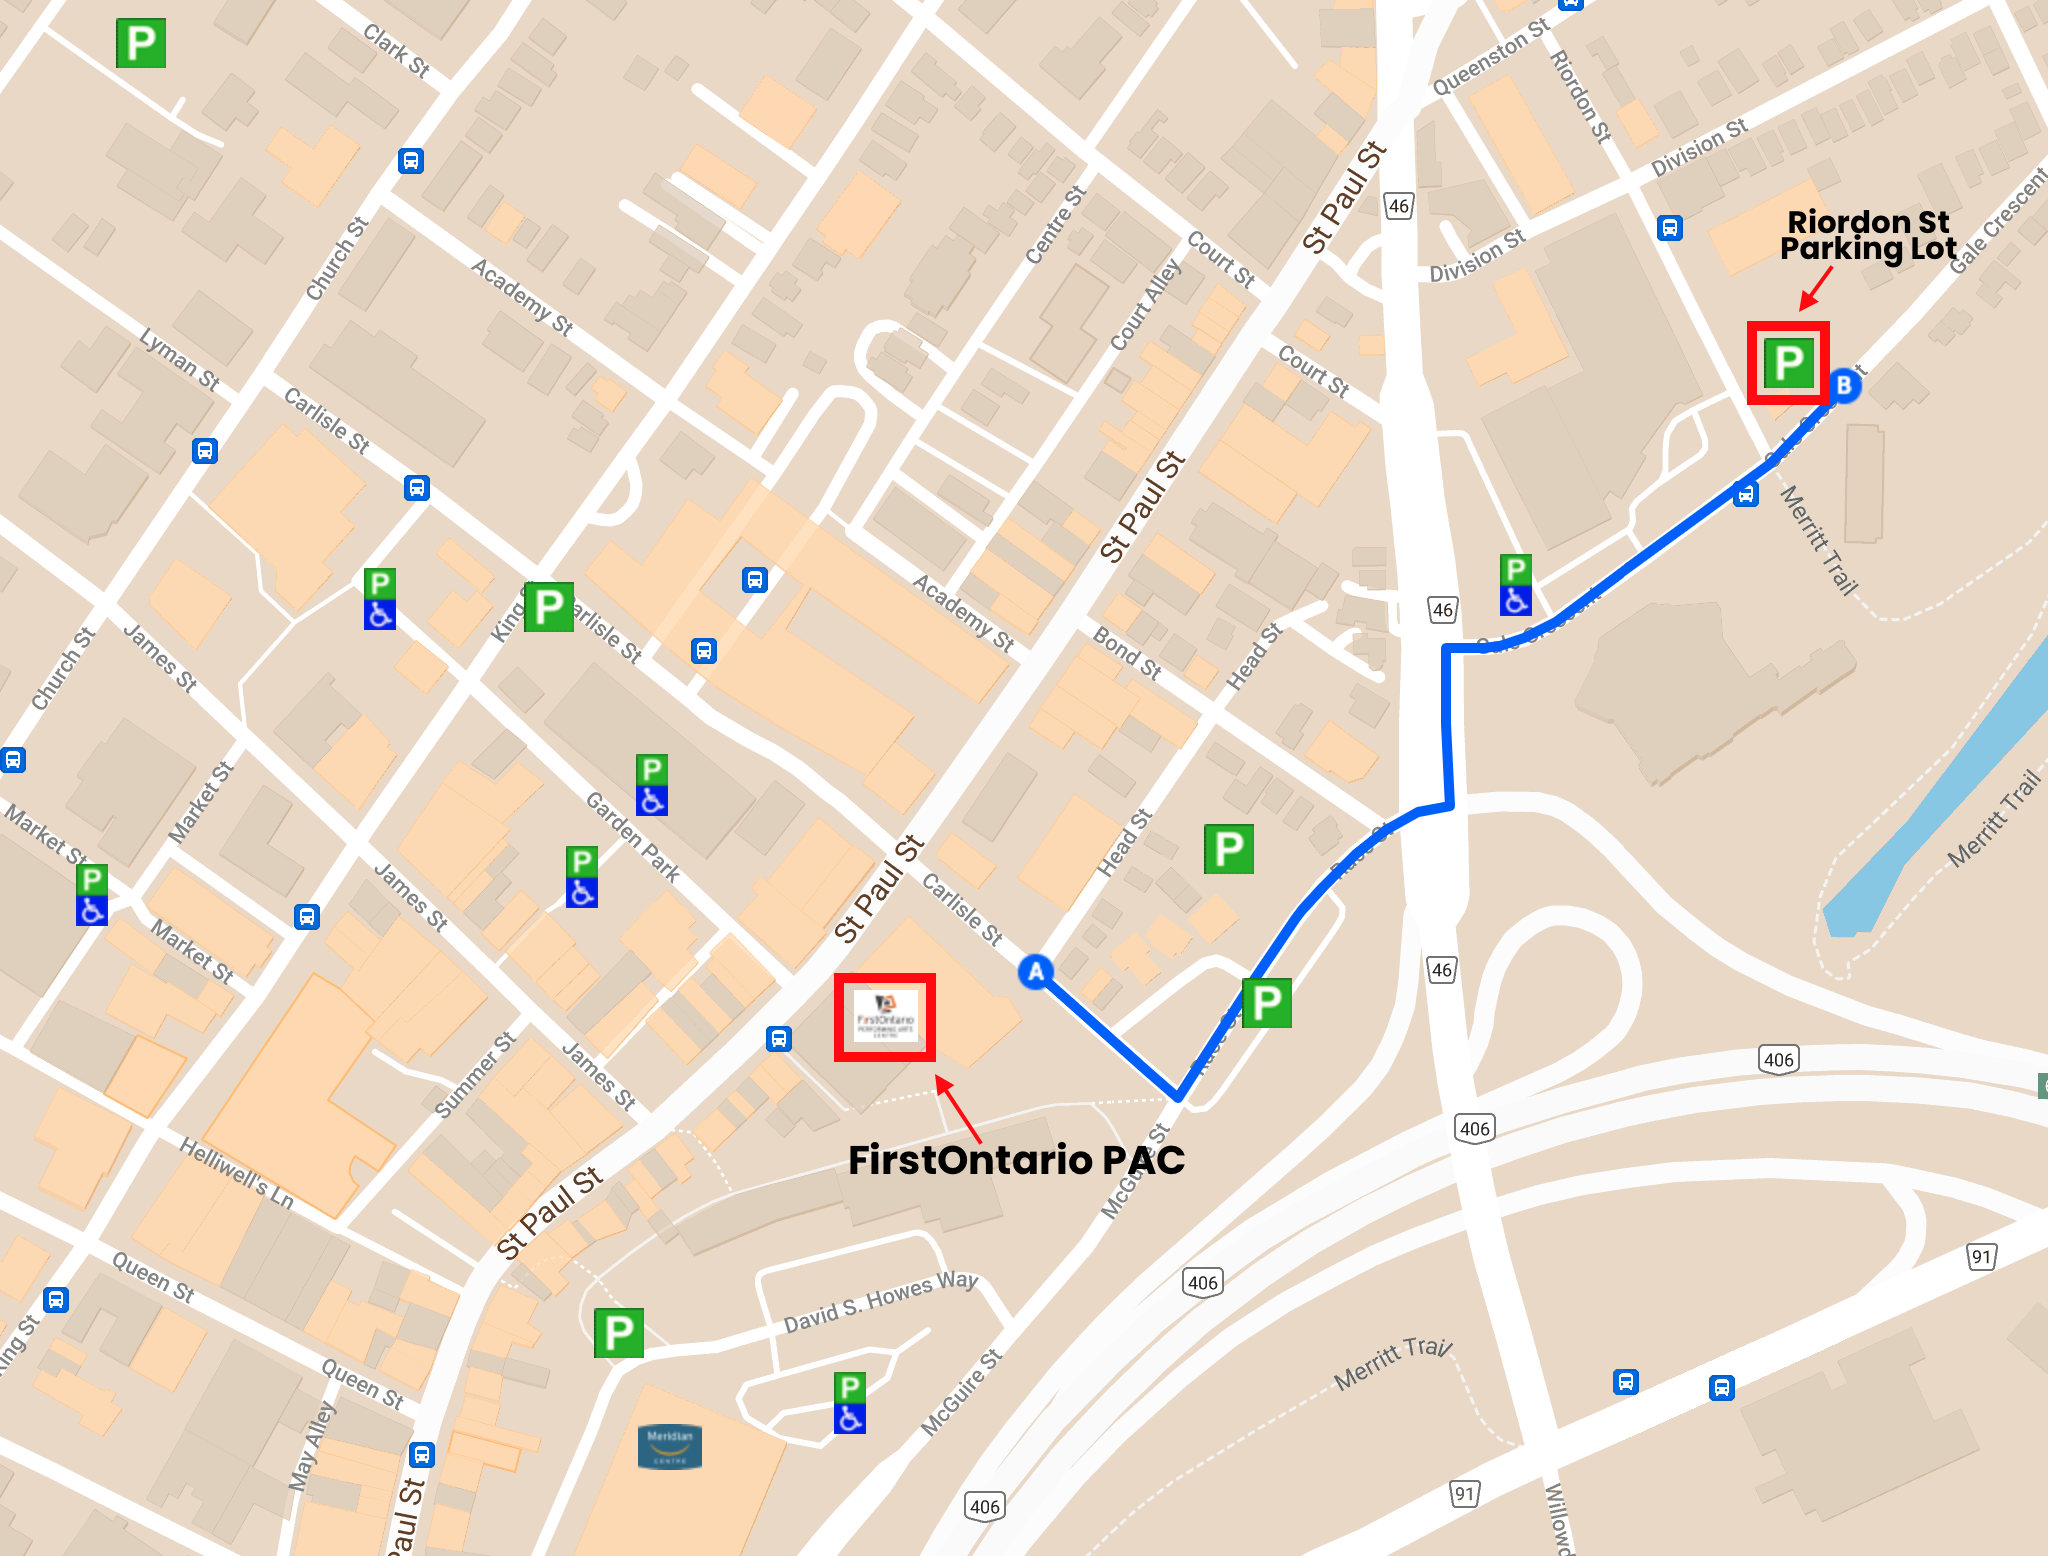 map of FirstOntario PAC and surrounding areas; showing directions to Riordon St Parking Lot